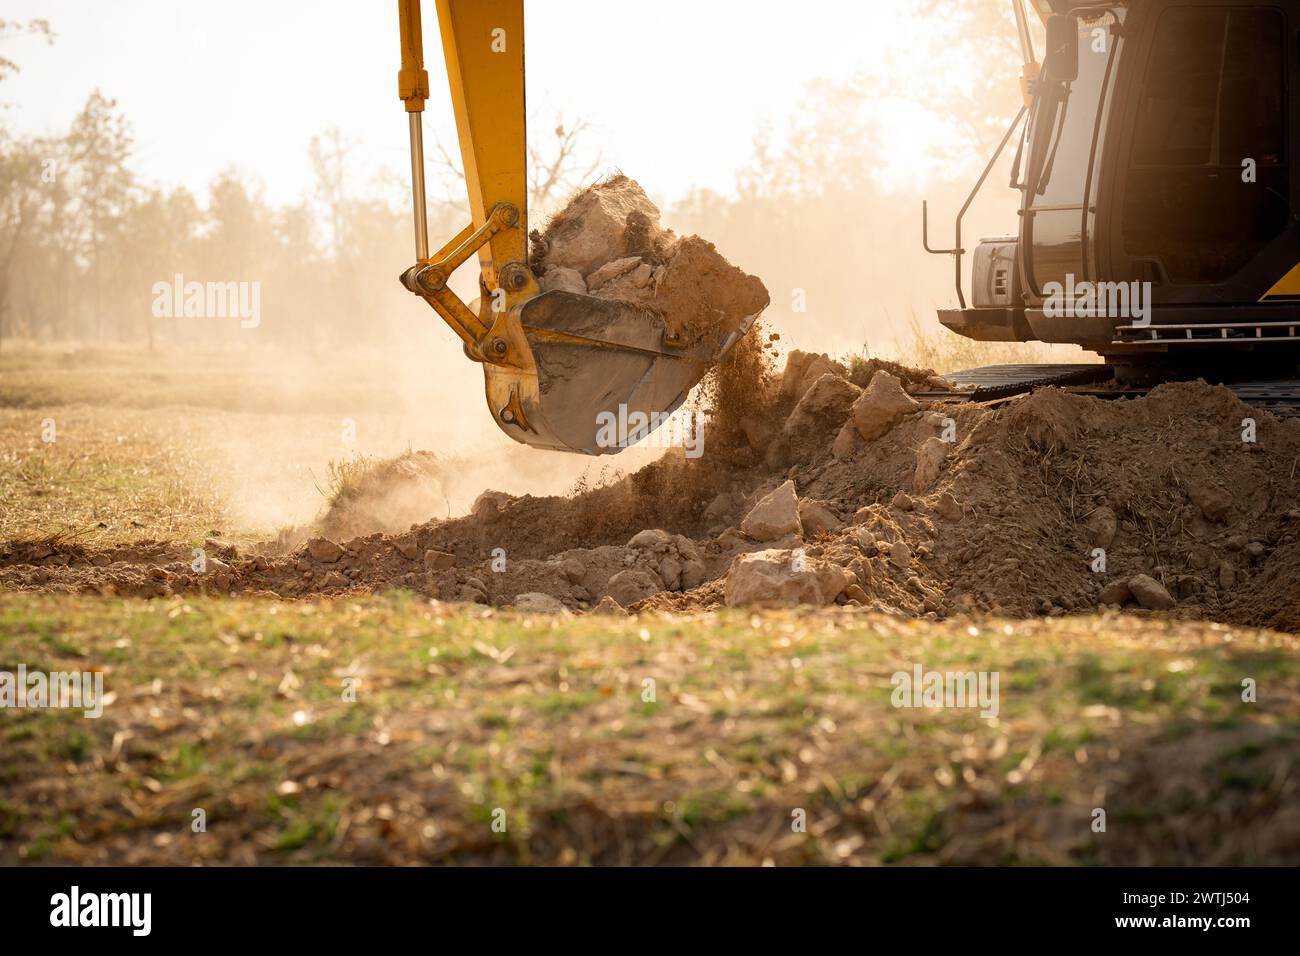 Backhoe working by digging soil at construction site.  Crawler excavator digging on demolition site. Excavating machine. Earth moving machine. Excavat Stock Photo